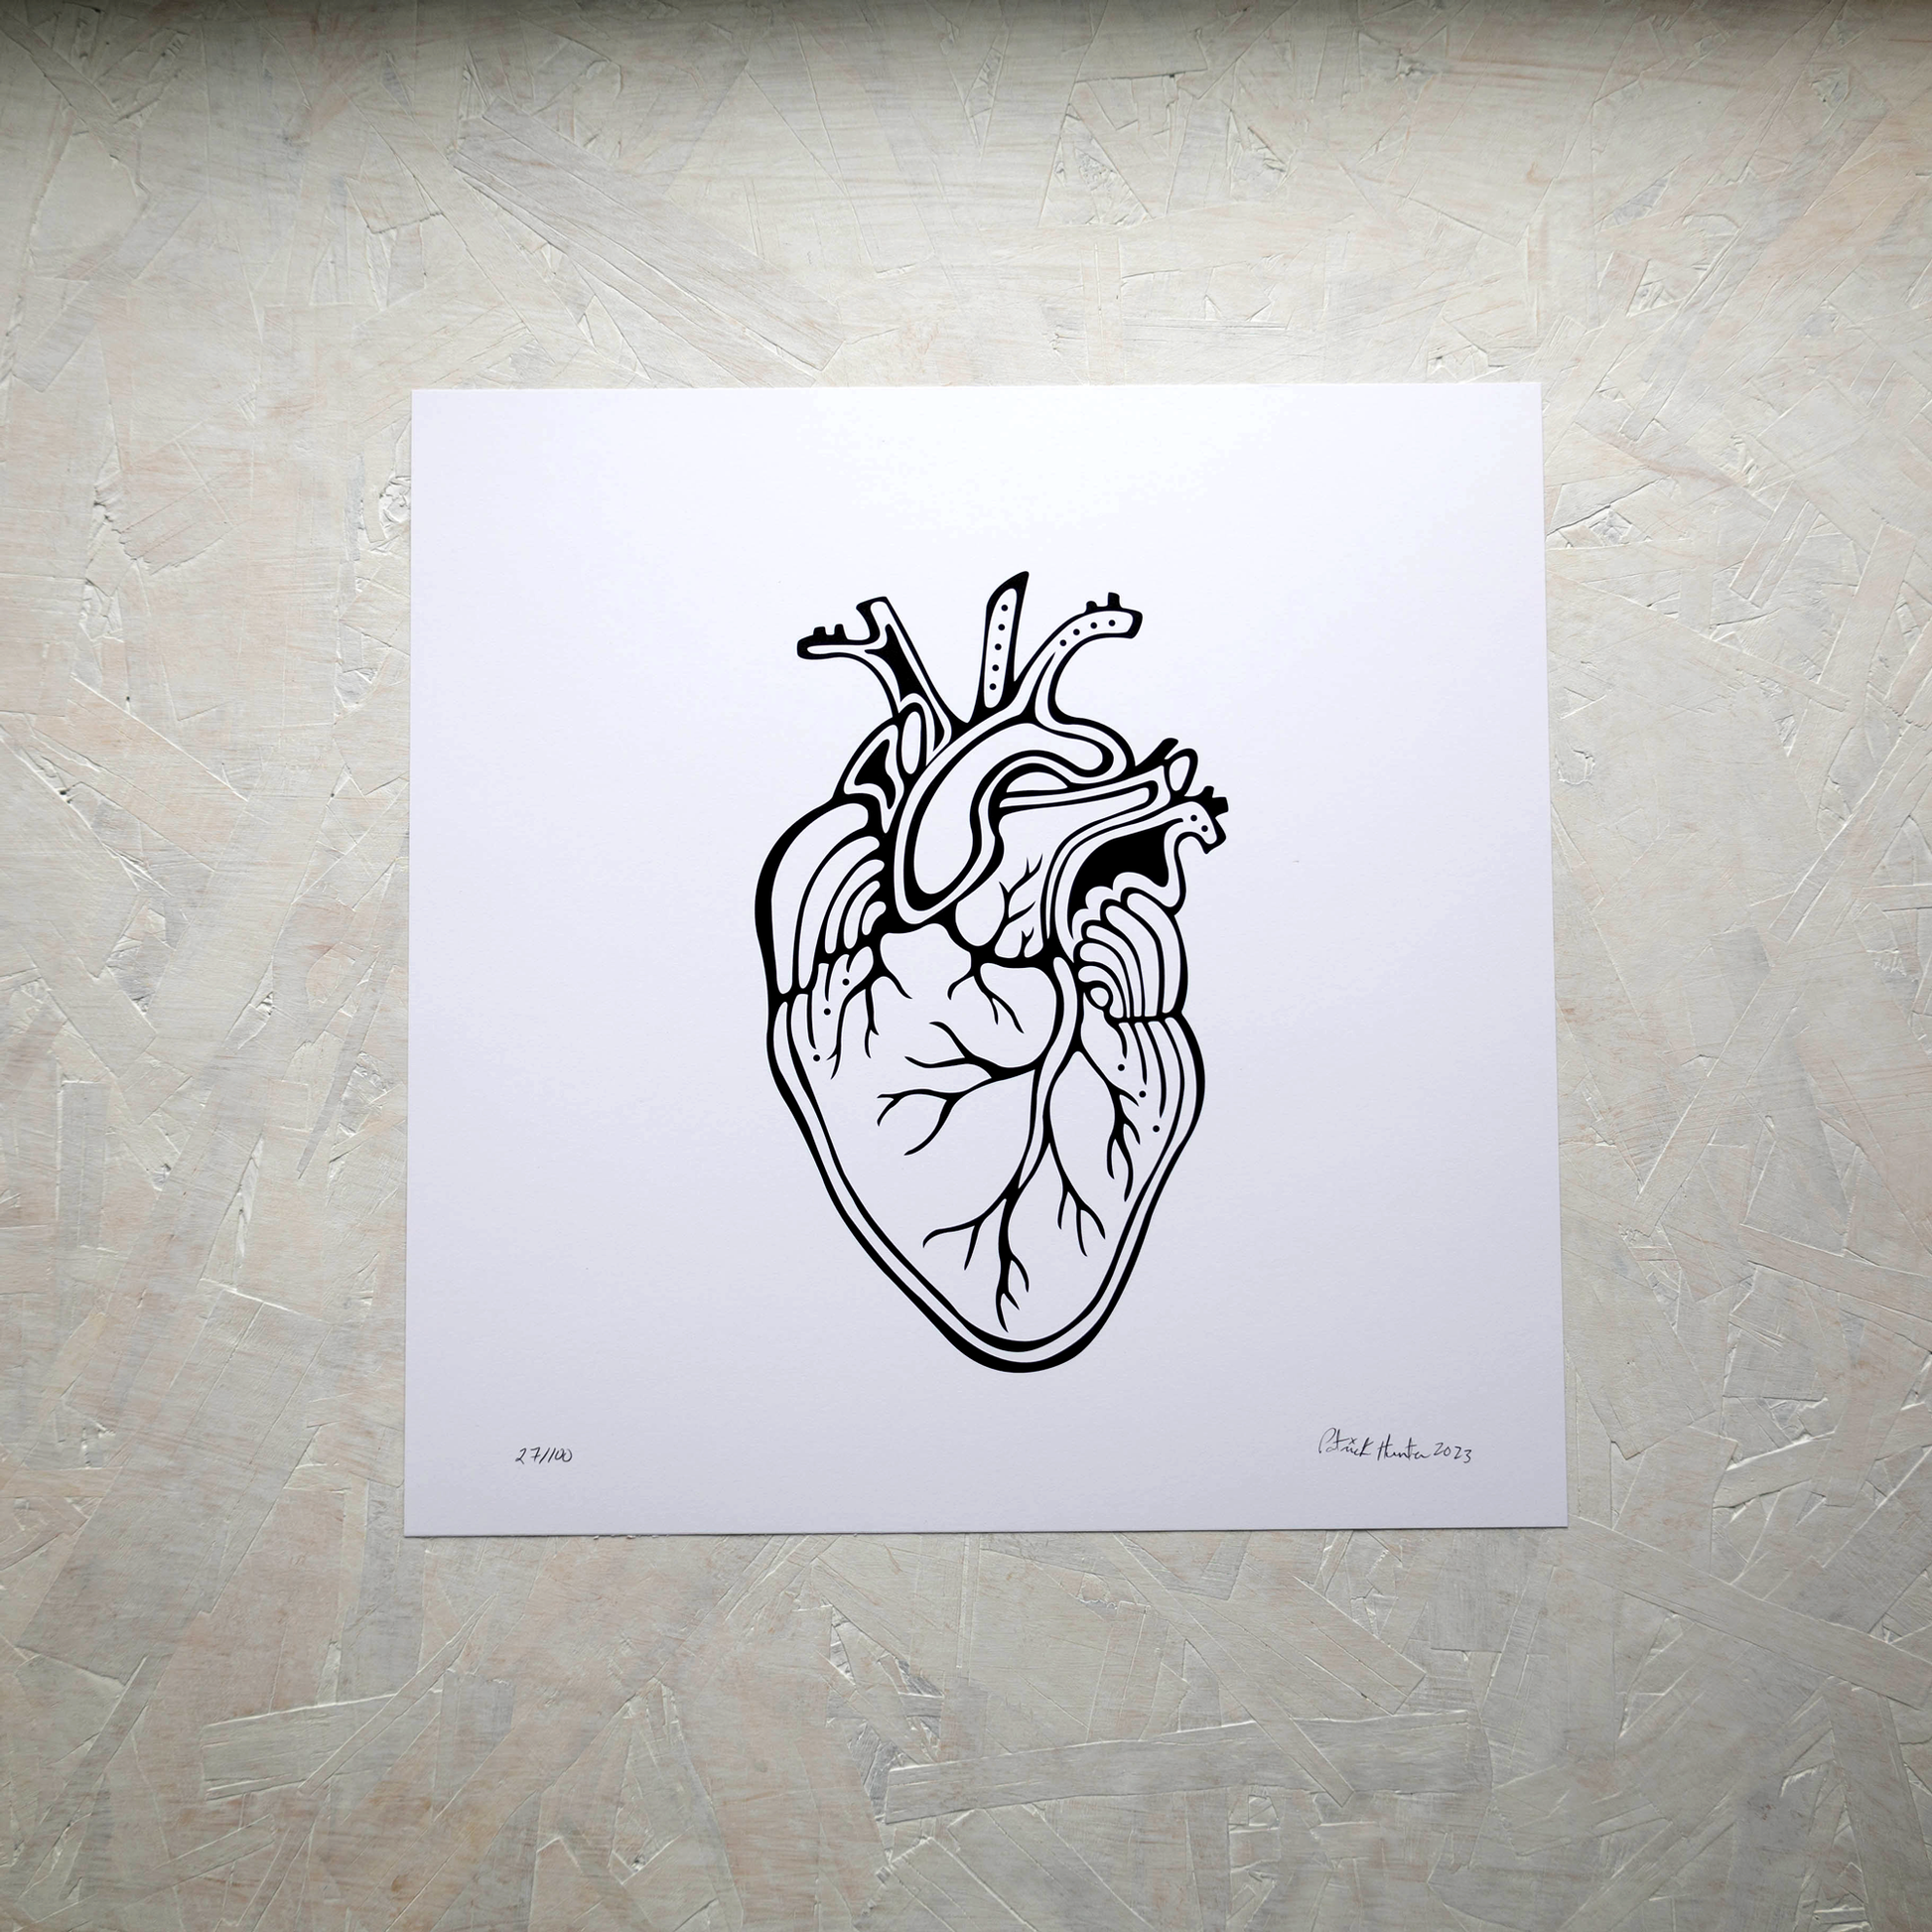 Print of Patrick Hunter's painting of an anatomical heart in black and white, woodland art style.